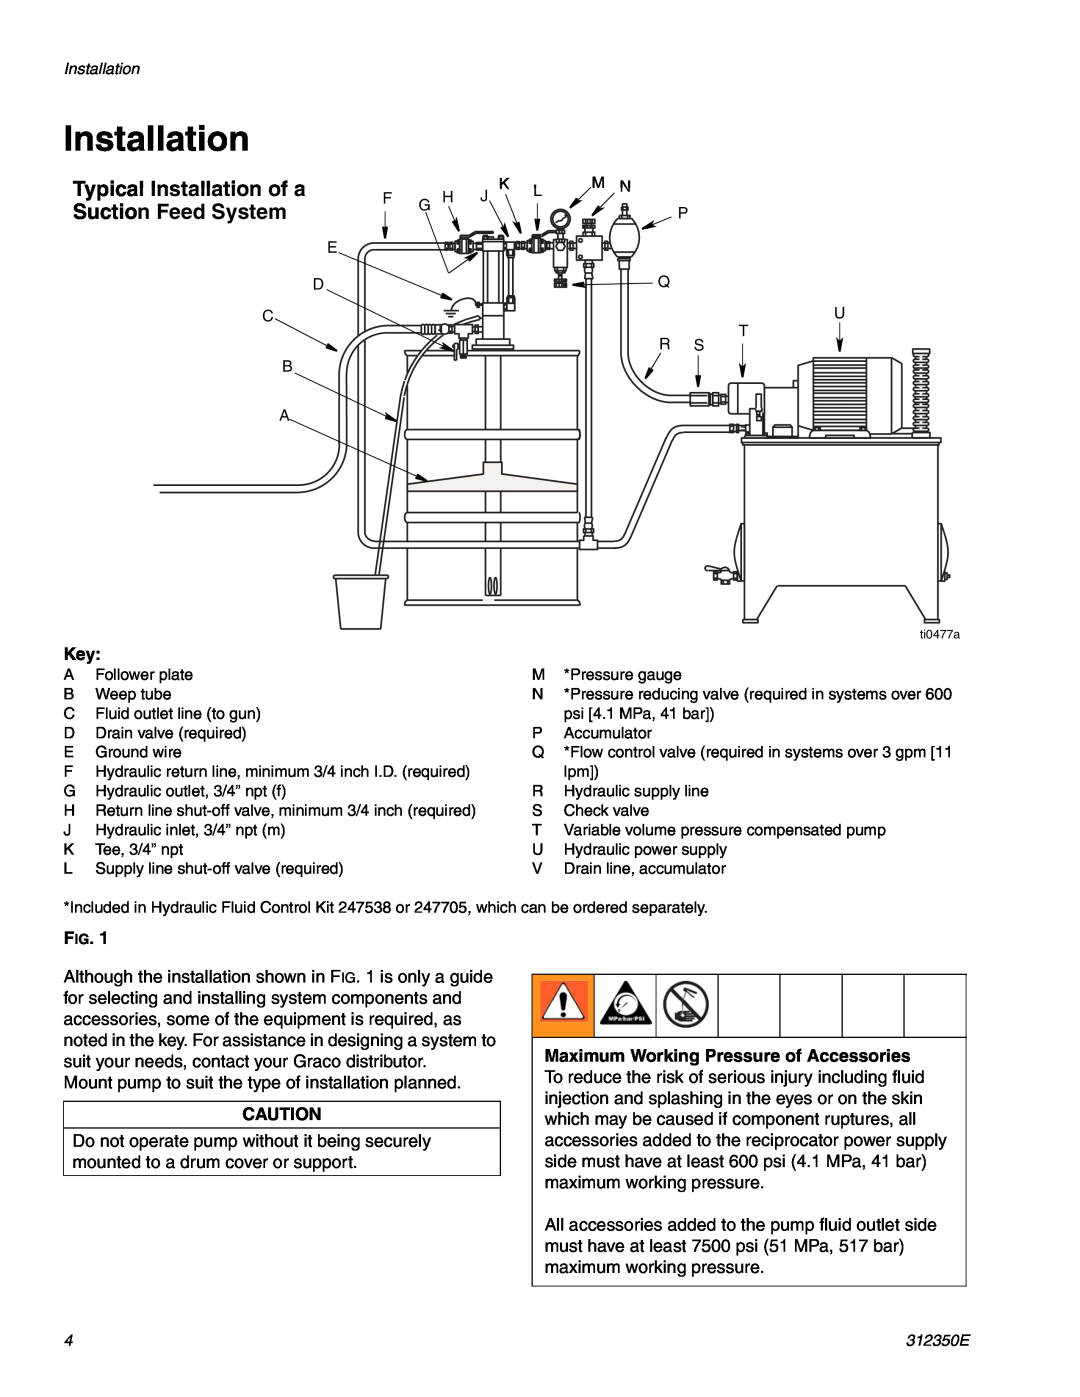 Hitachi 312350E important safety instructions Typical Installation of a, Suction Feed System 